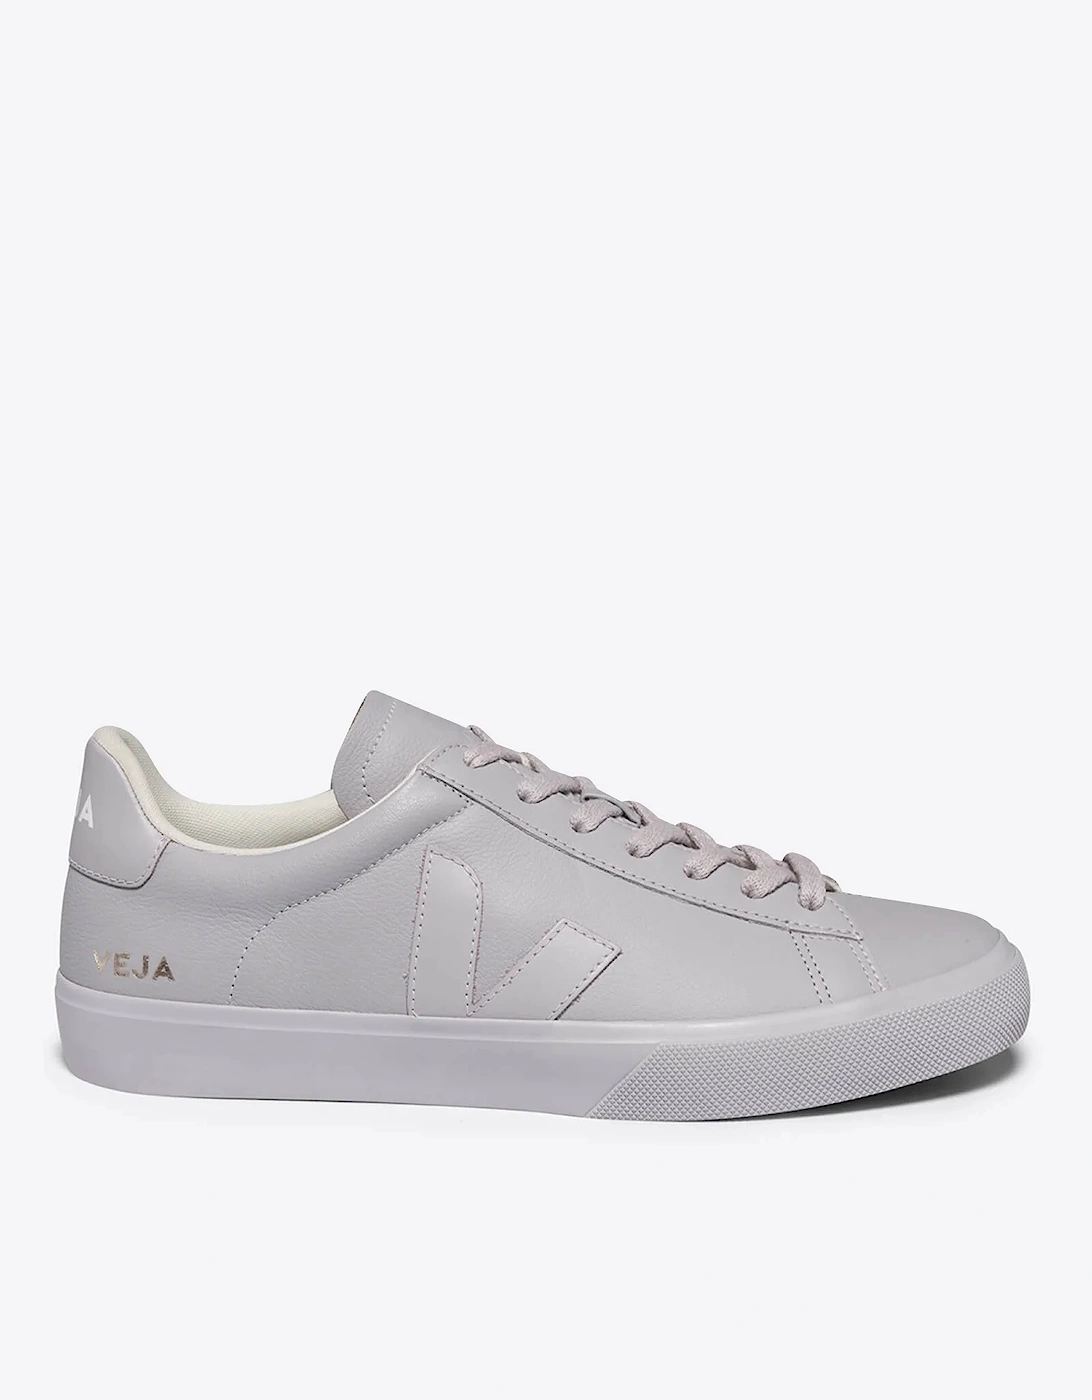 Women's Campo Chrome-Free Leather Trainers - - Home - Women's Shoes - Women's Low Top Trainers - Women's Campo Chrome-Free Leather Trainers, 2 of 1